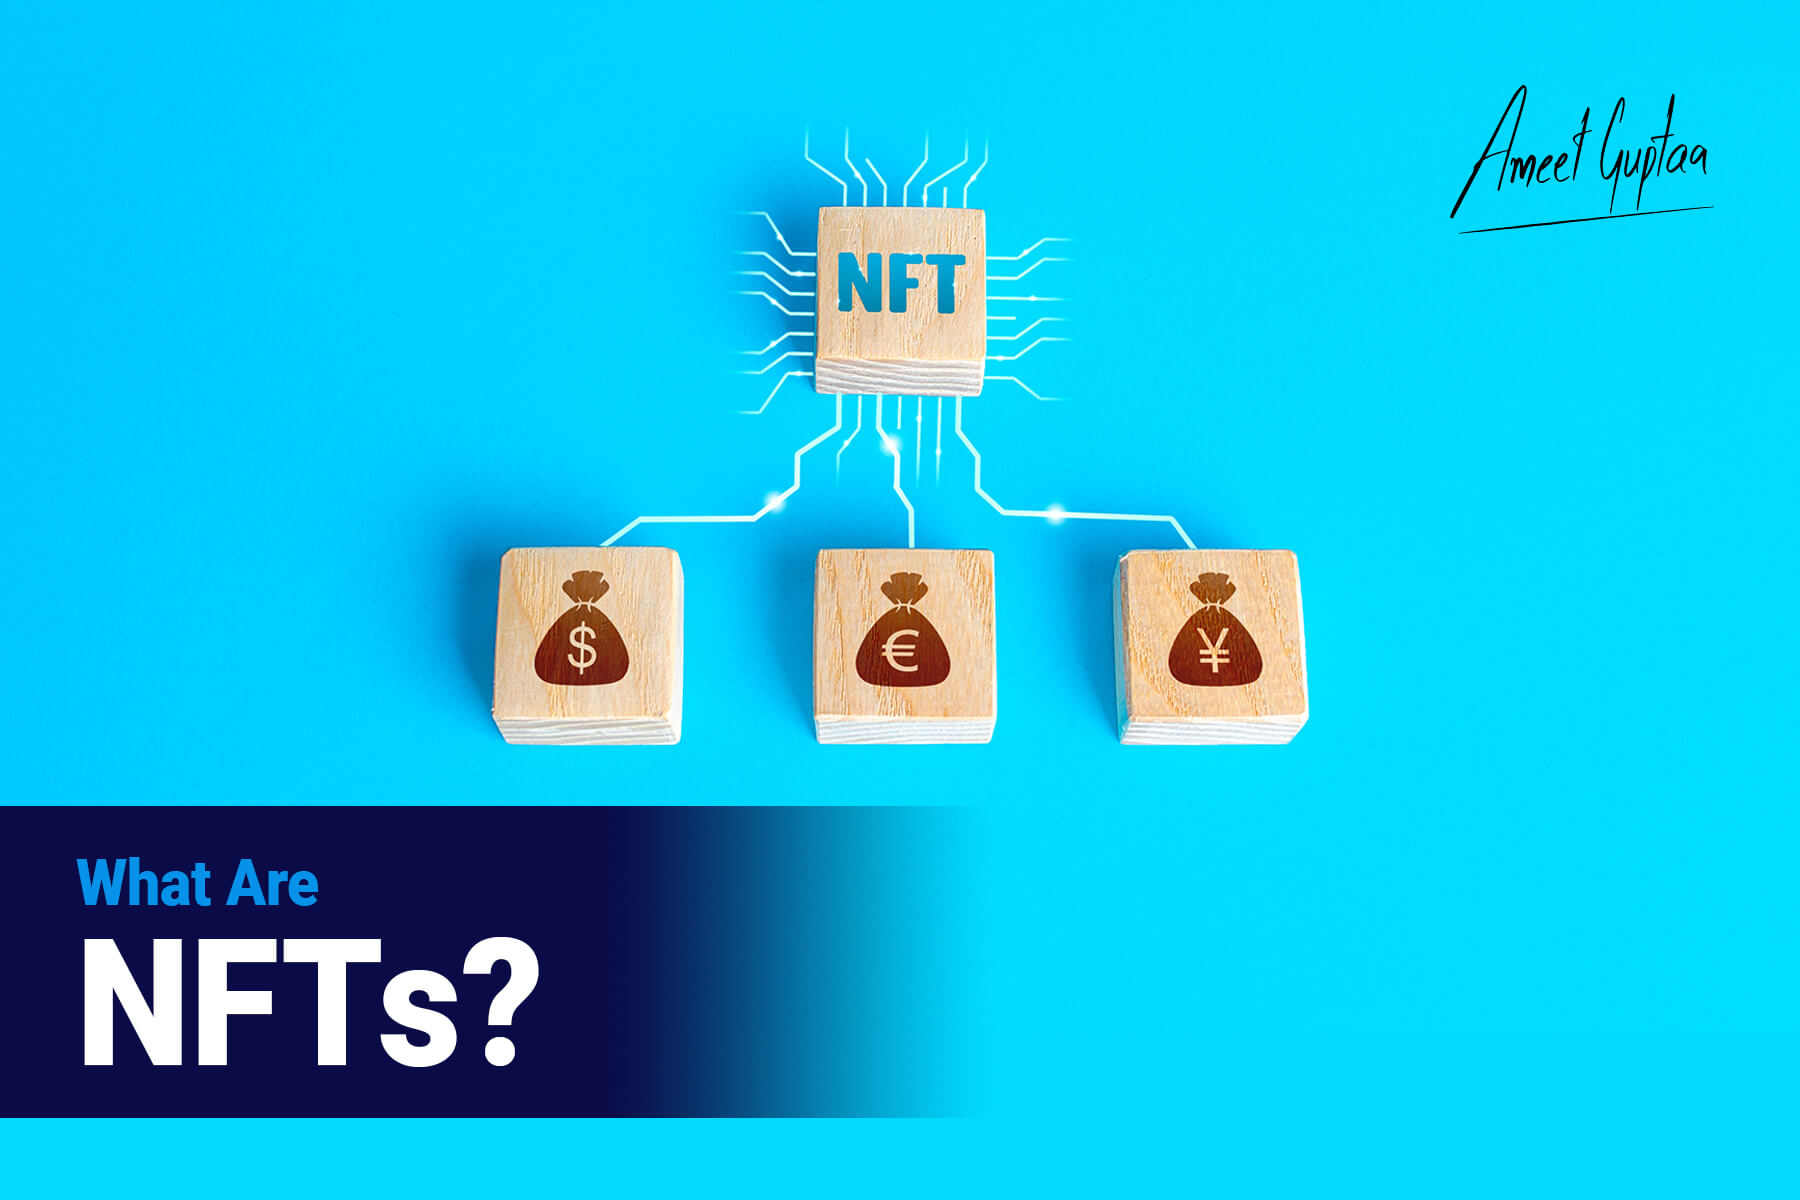 What are NFTs? Non-Fungible Tokens